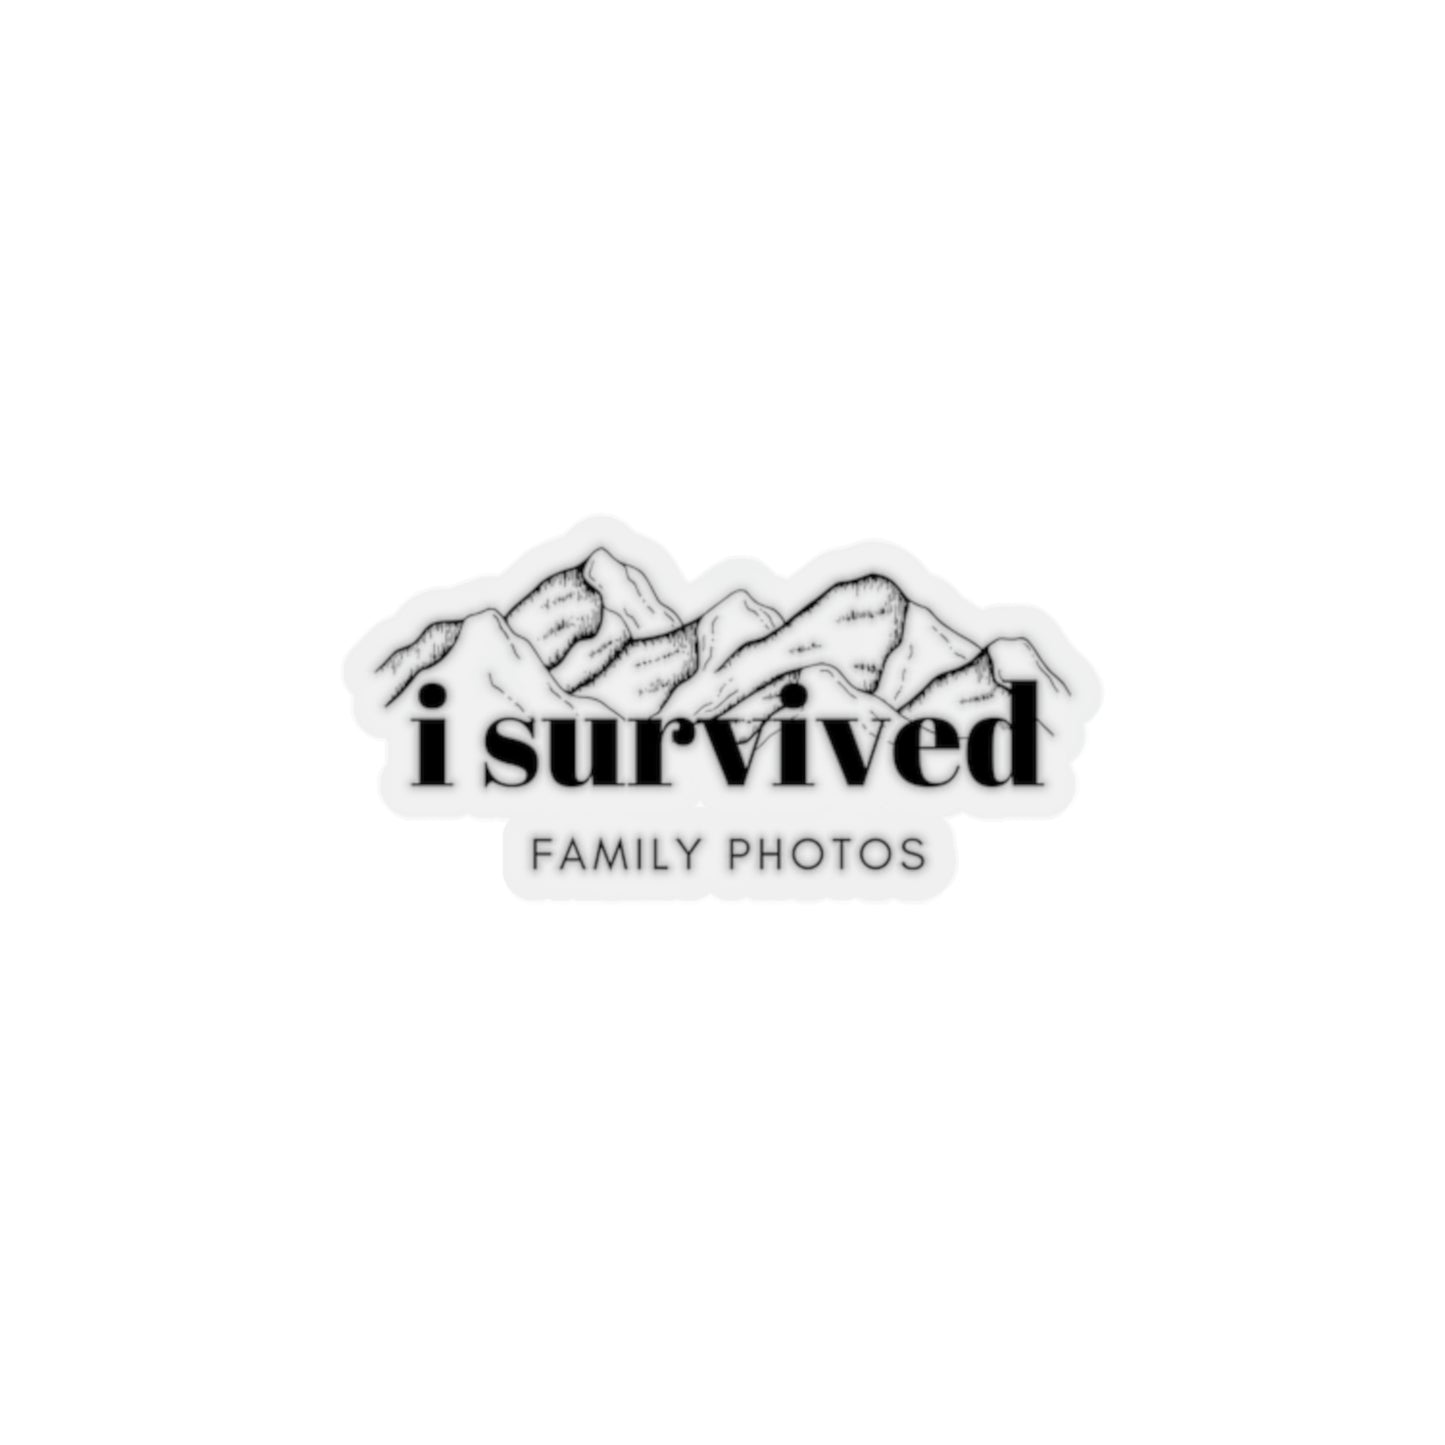 I Survived Family Photos Kiss-Cut Stickers